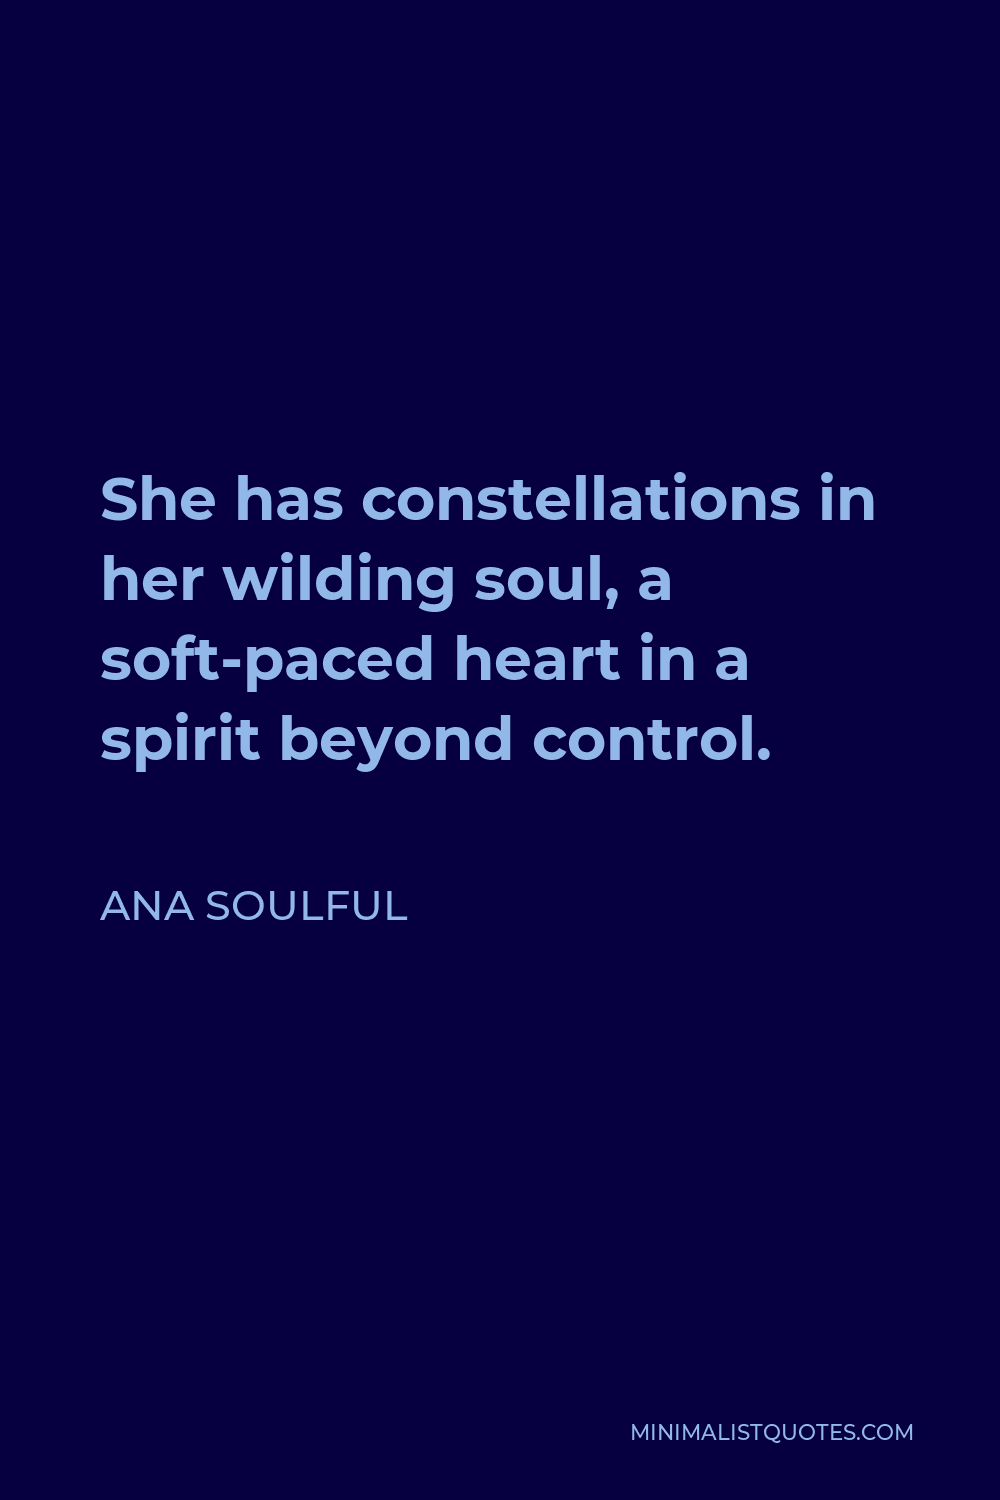 Ana Soulful Quote - She has constellations in her wilding soul, a soft-paced heart in a spirit beyond control.